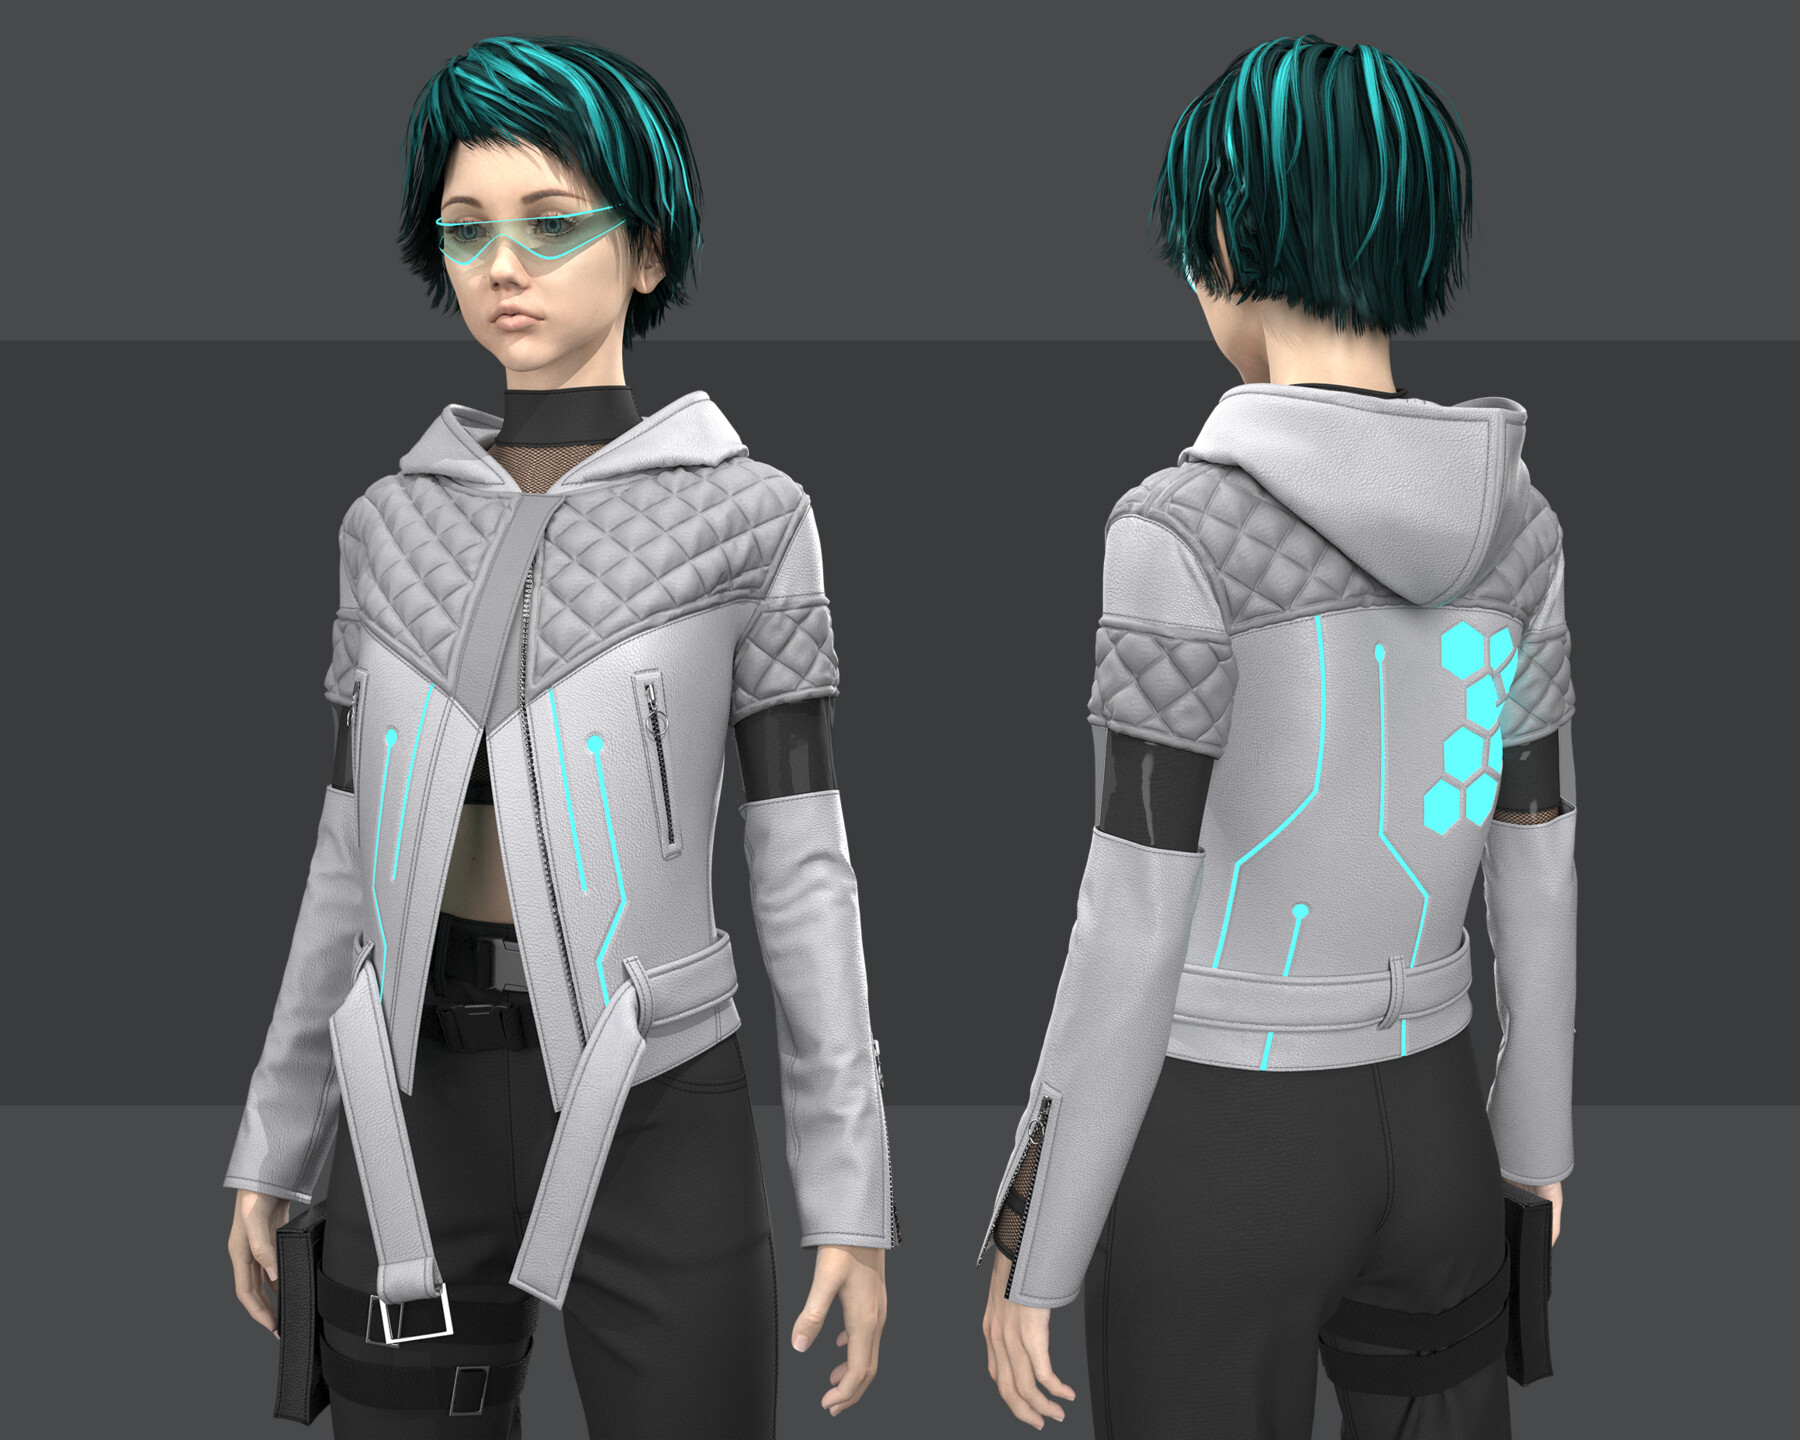 ArtStation Cyberpunk Outfit Neo Tokyo Collection Resources | vlr.eng.br